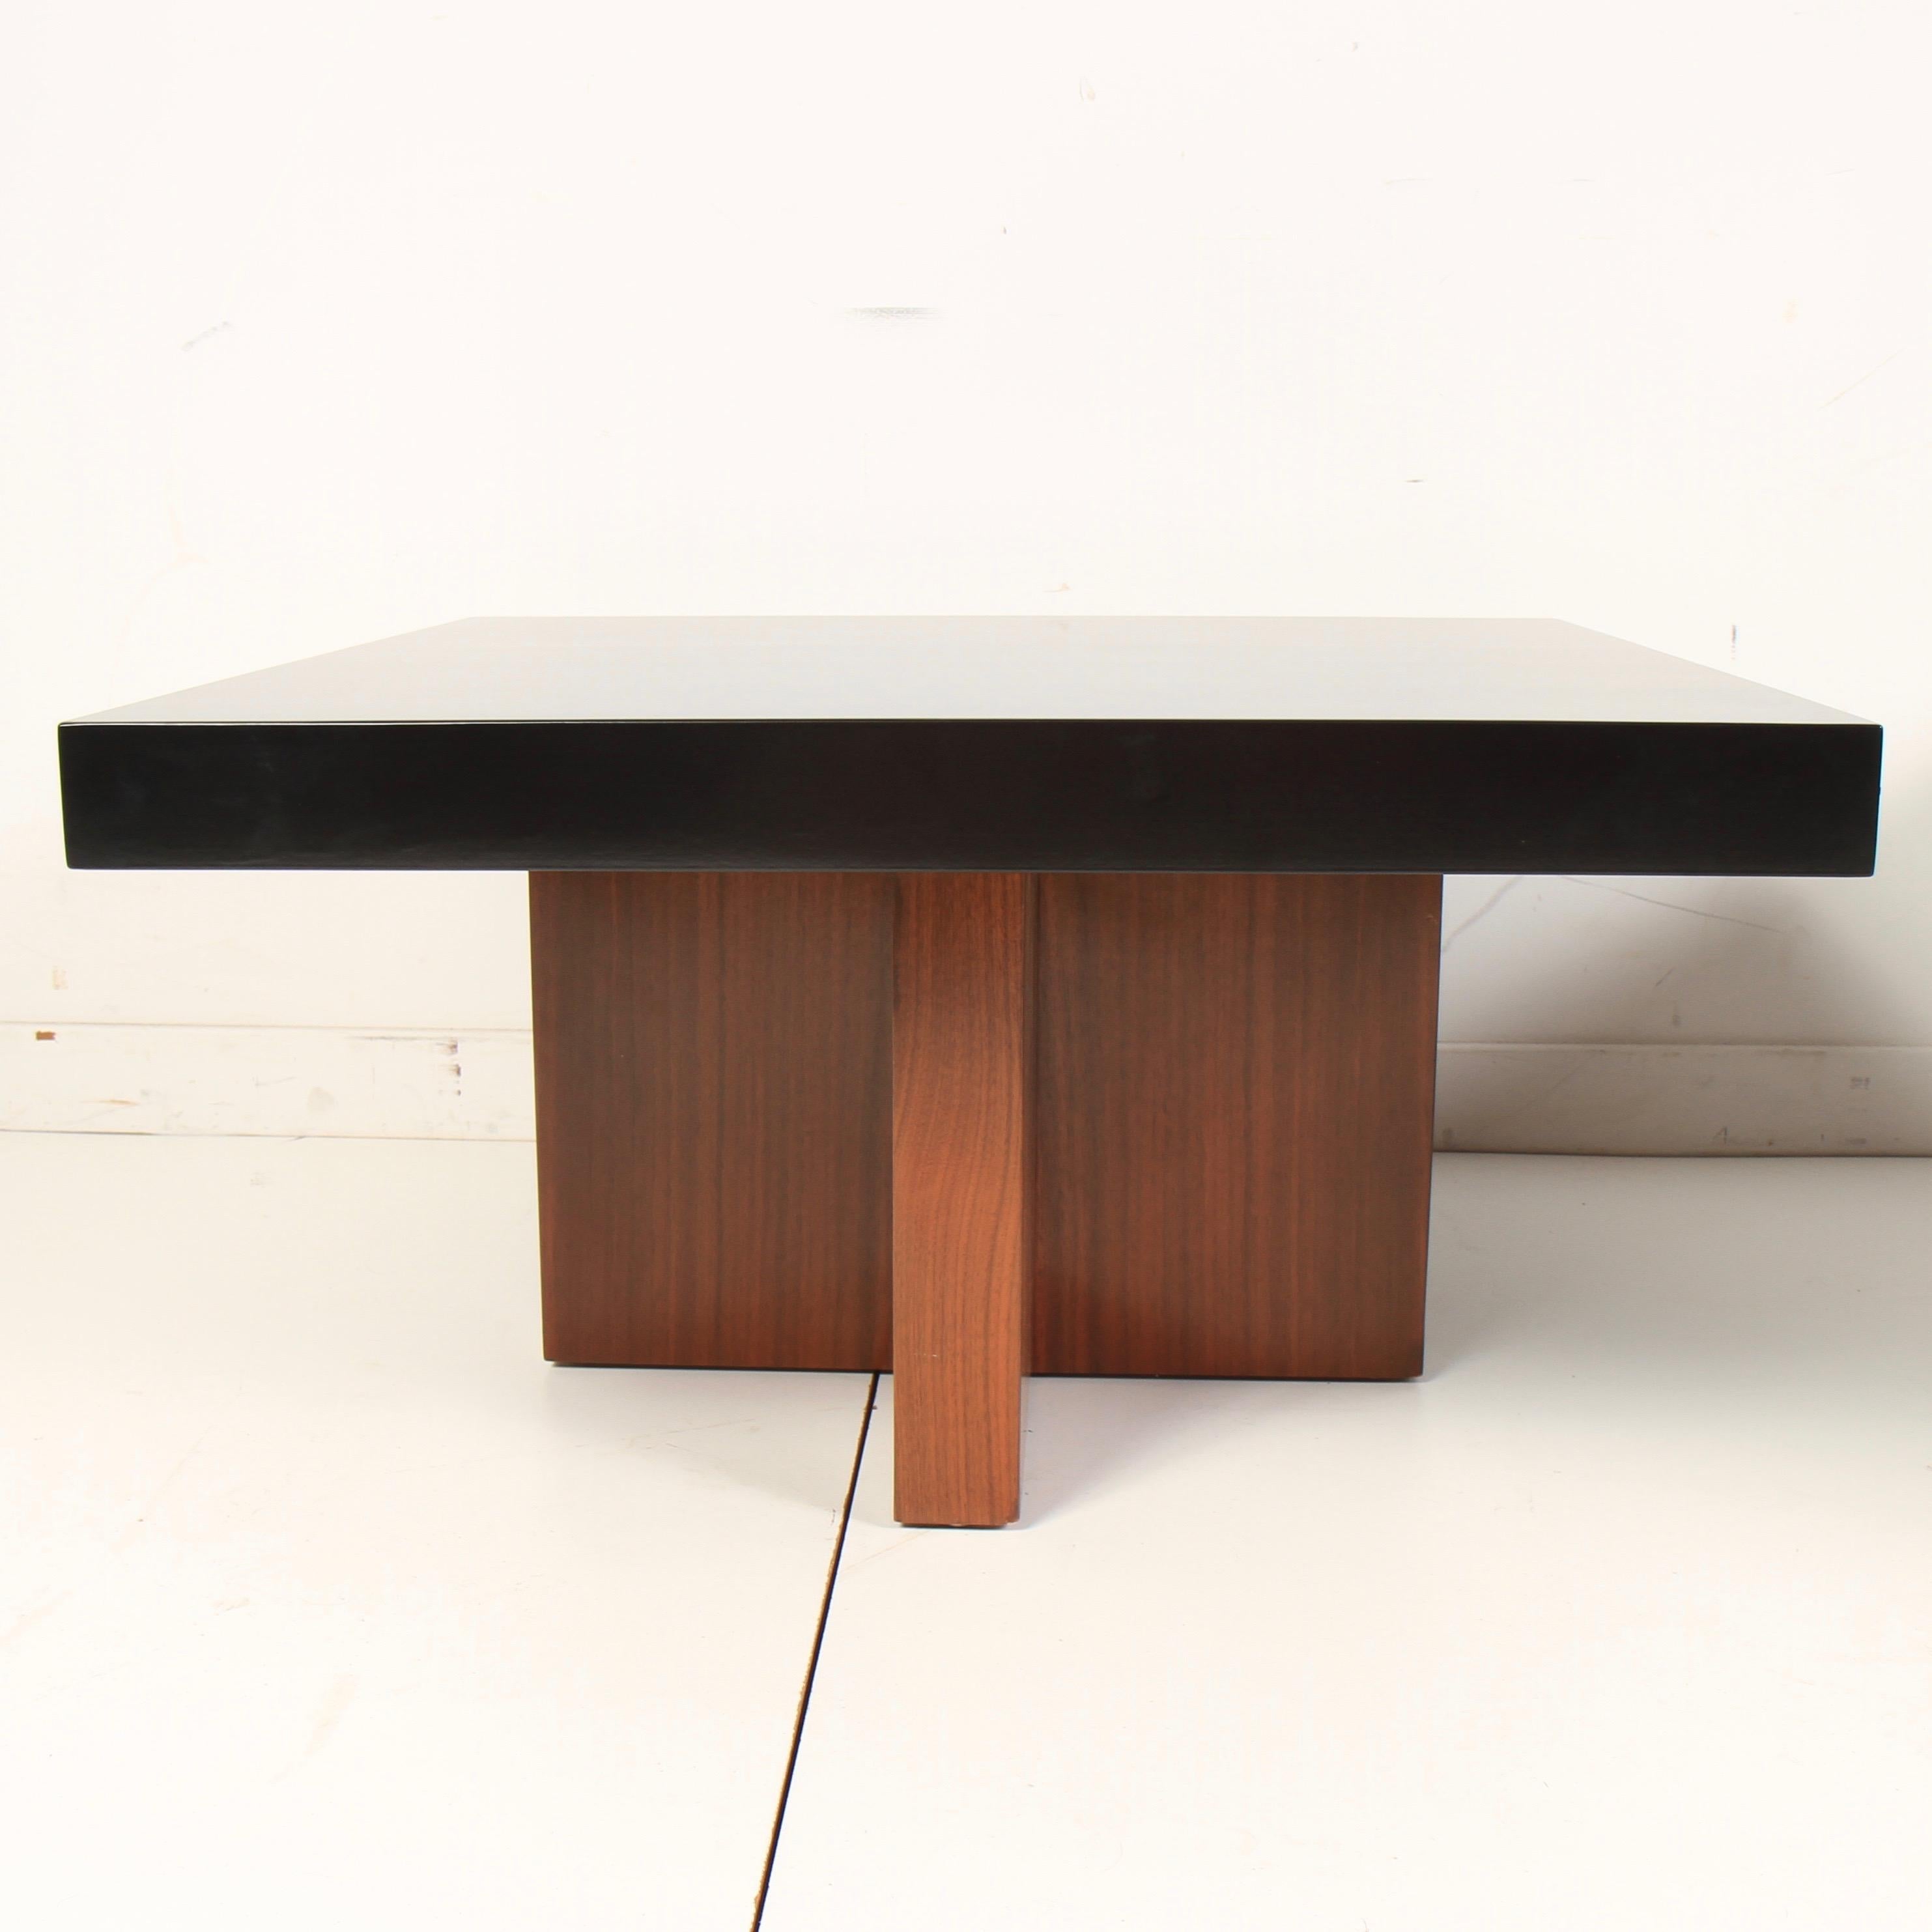 Pair of X-based walnut end tables, designed by Milo Baughman for Thayer Coggin, circa 1960s. The tops have been lacquered in a great contrasting ebony. Tables can be used as end or side tables, or pushed together as a coffee table.